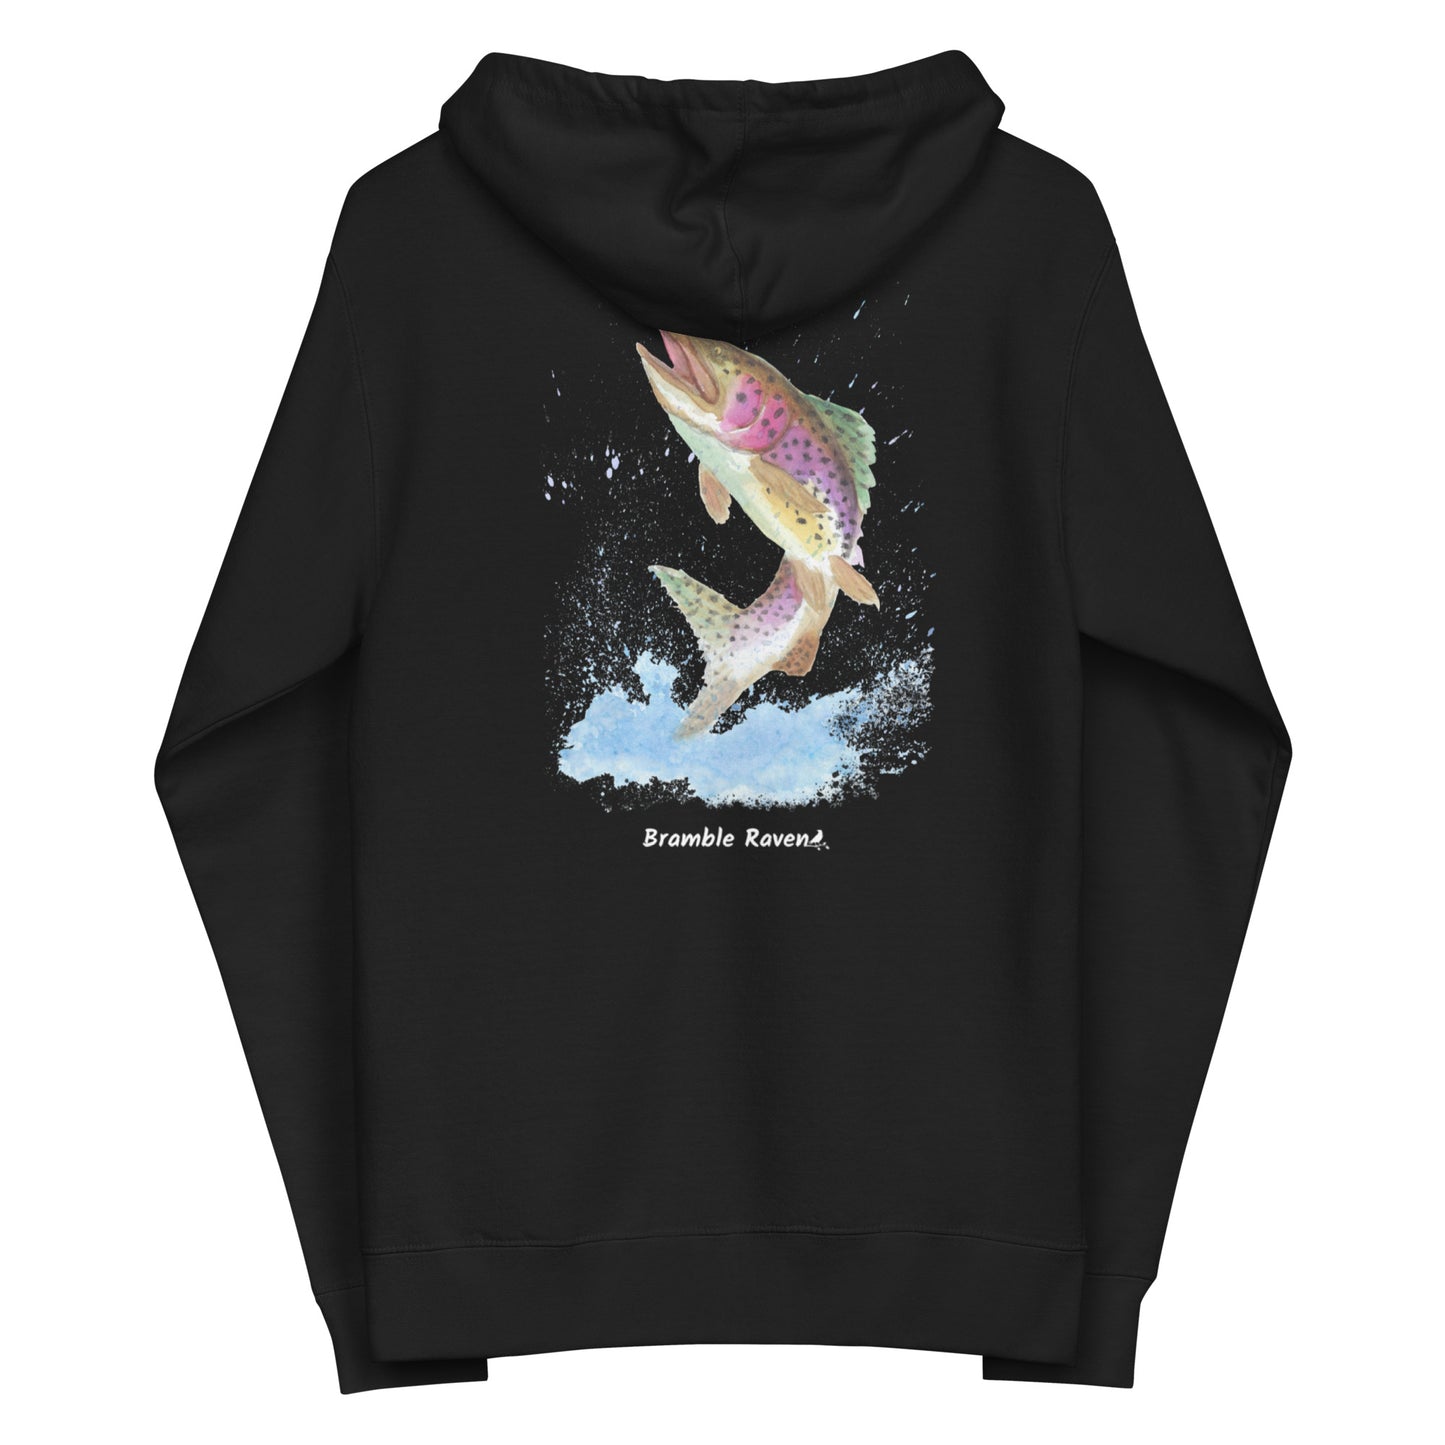 Unisex black colored fleece-lined zip-up hoodie. Features original watercolor painting of a rainbow trout leaping from the water on the back of the hoodie.